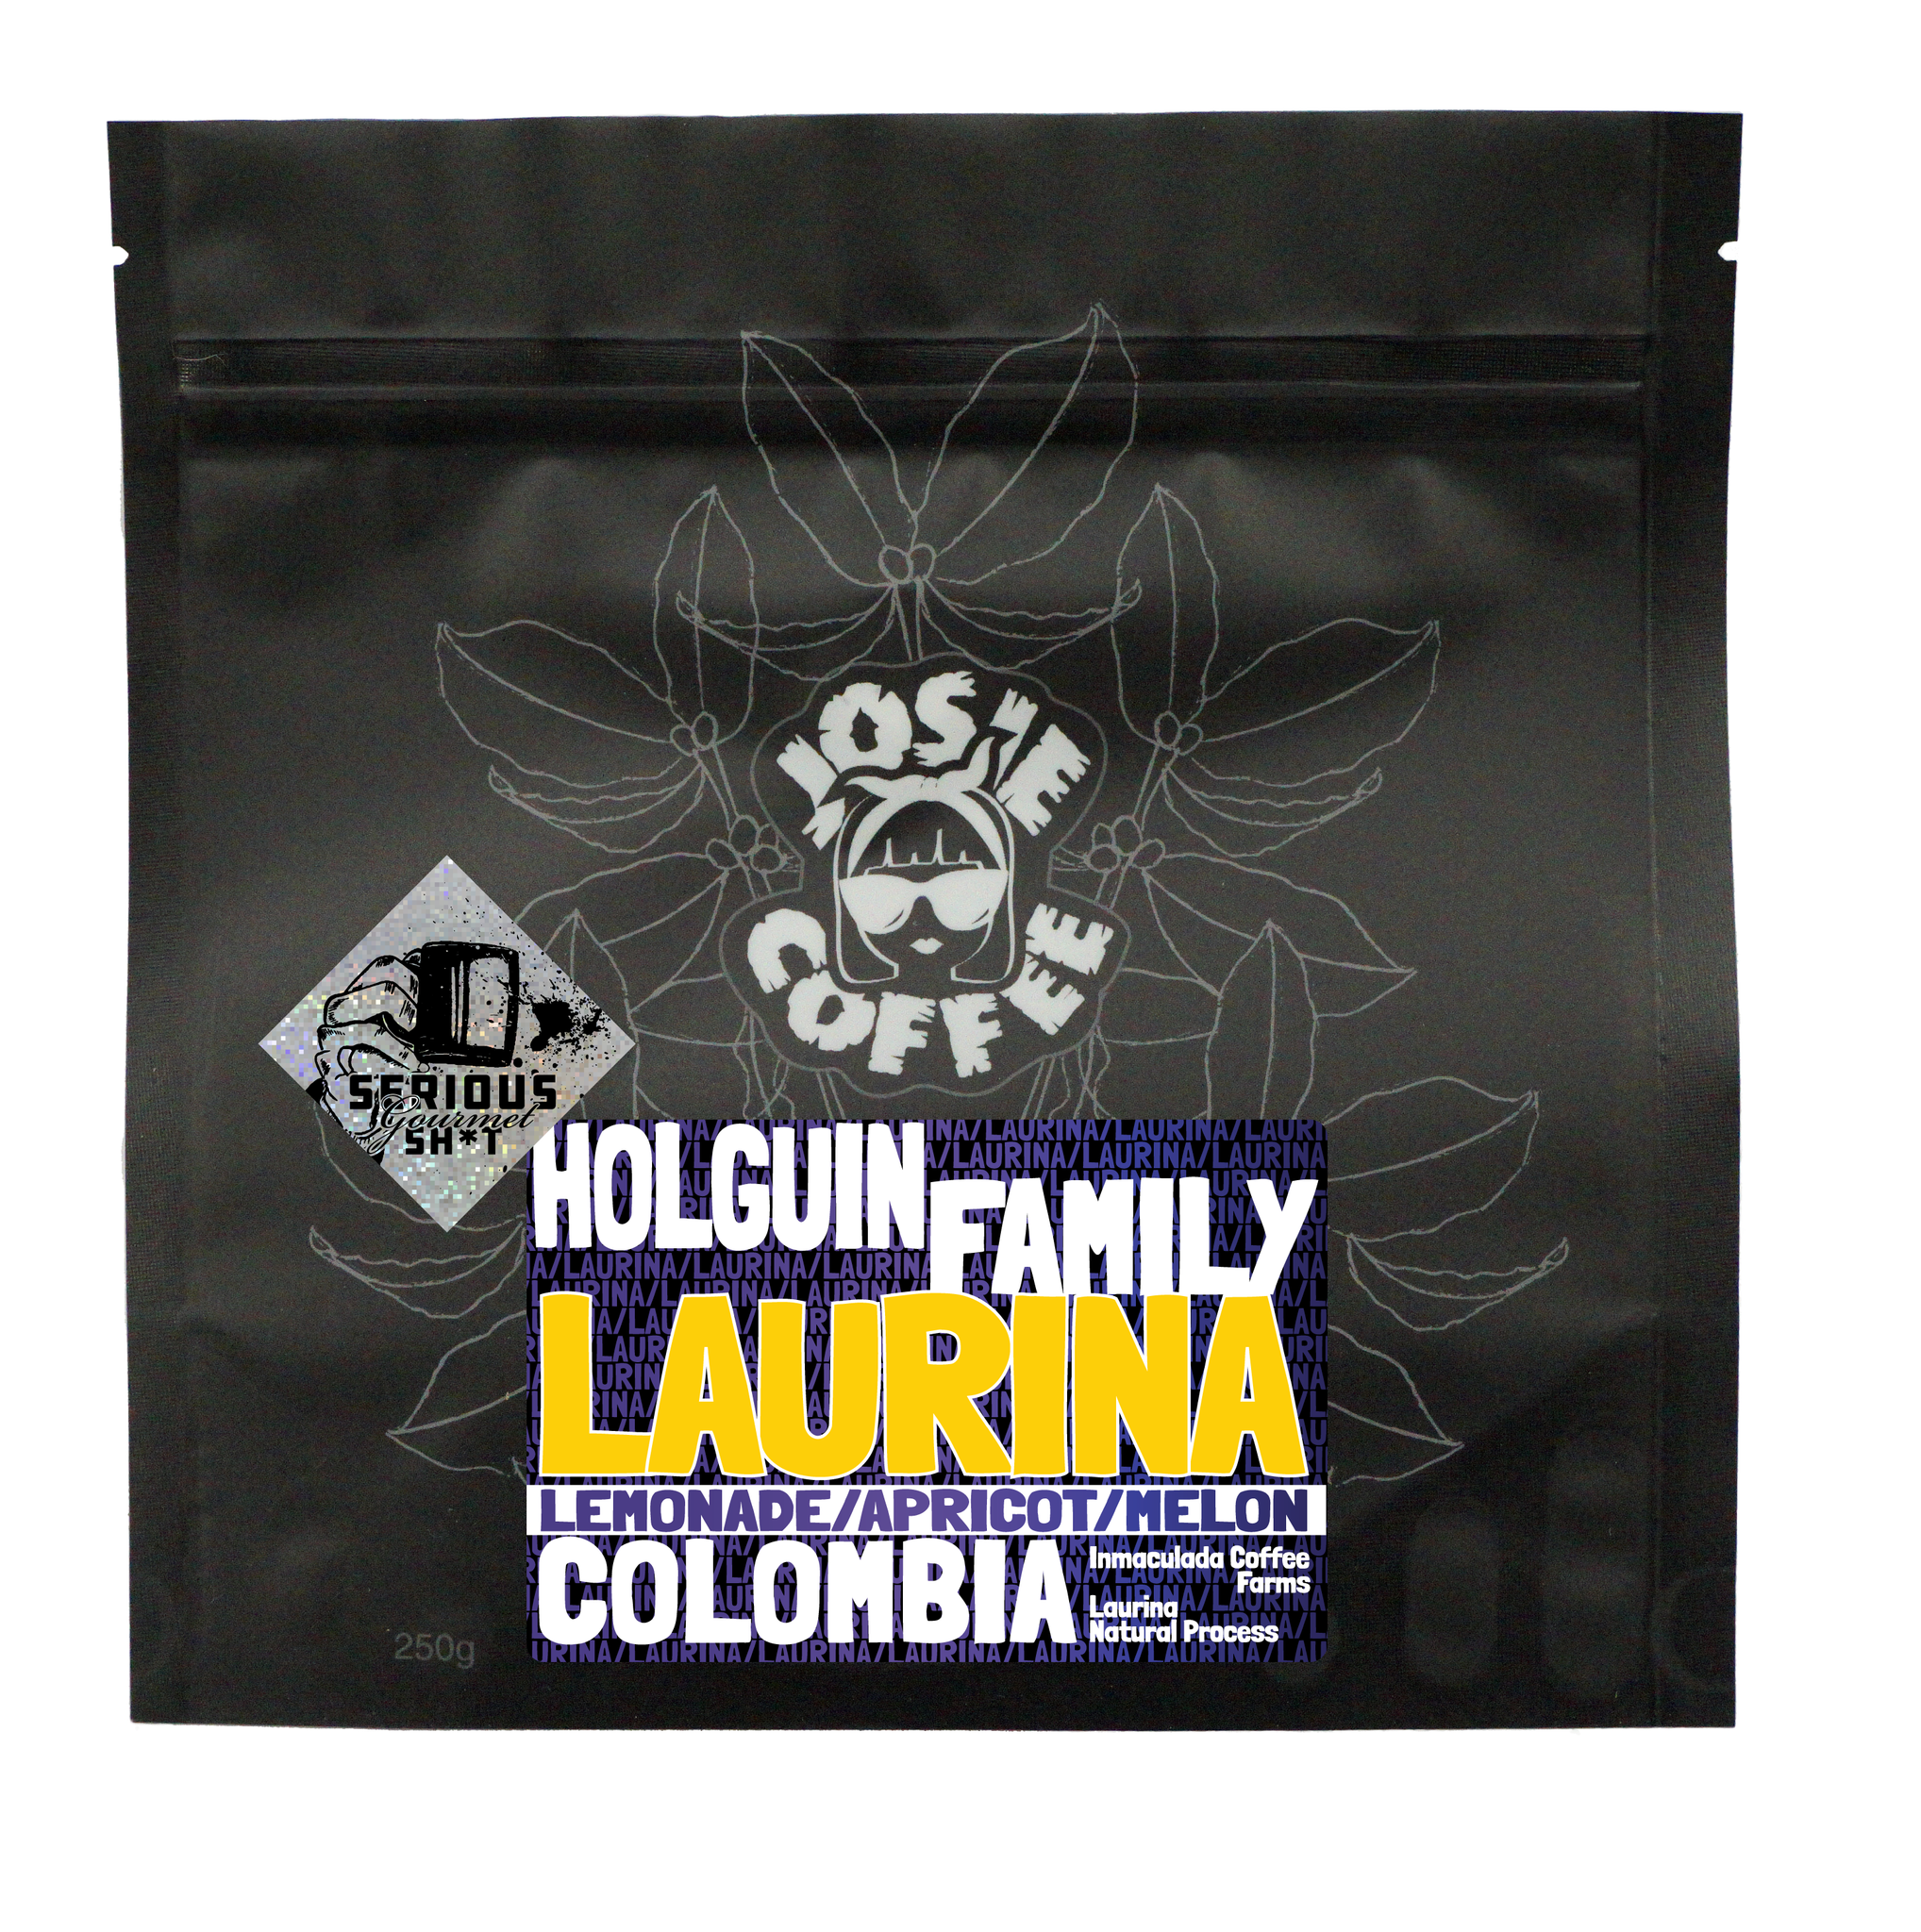 Colombia - Inmaculada Coffee Farms - Laurina - Natural